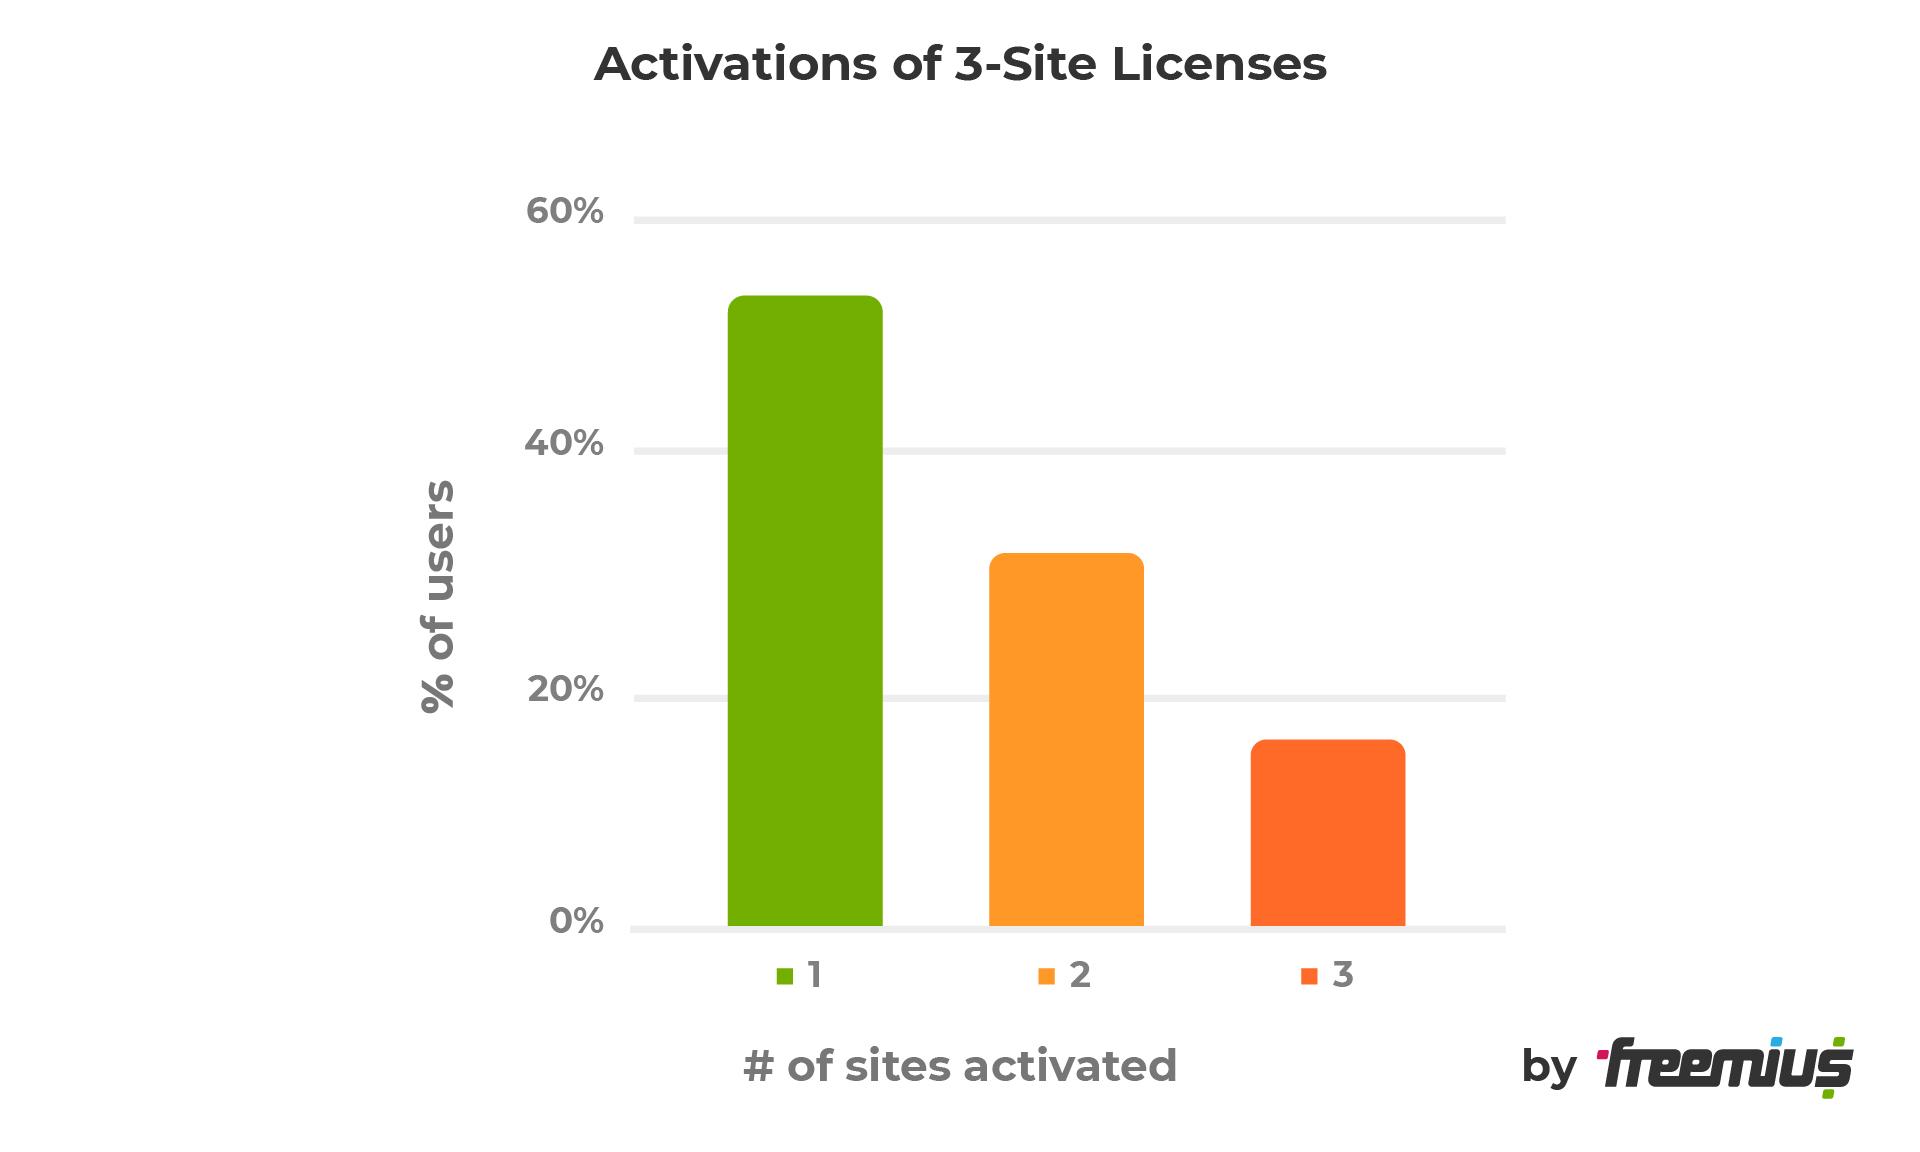 Activations of 3-site licenses